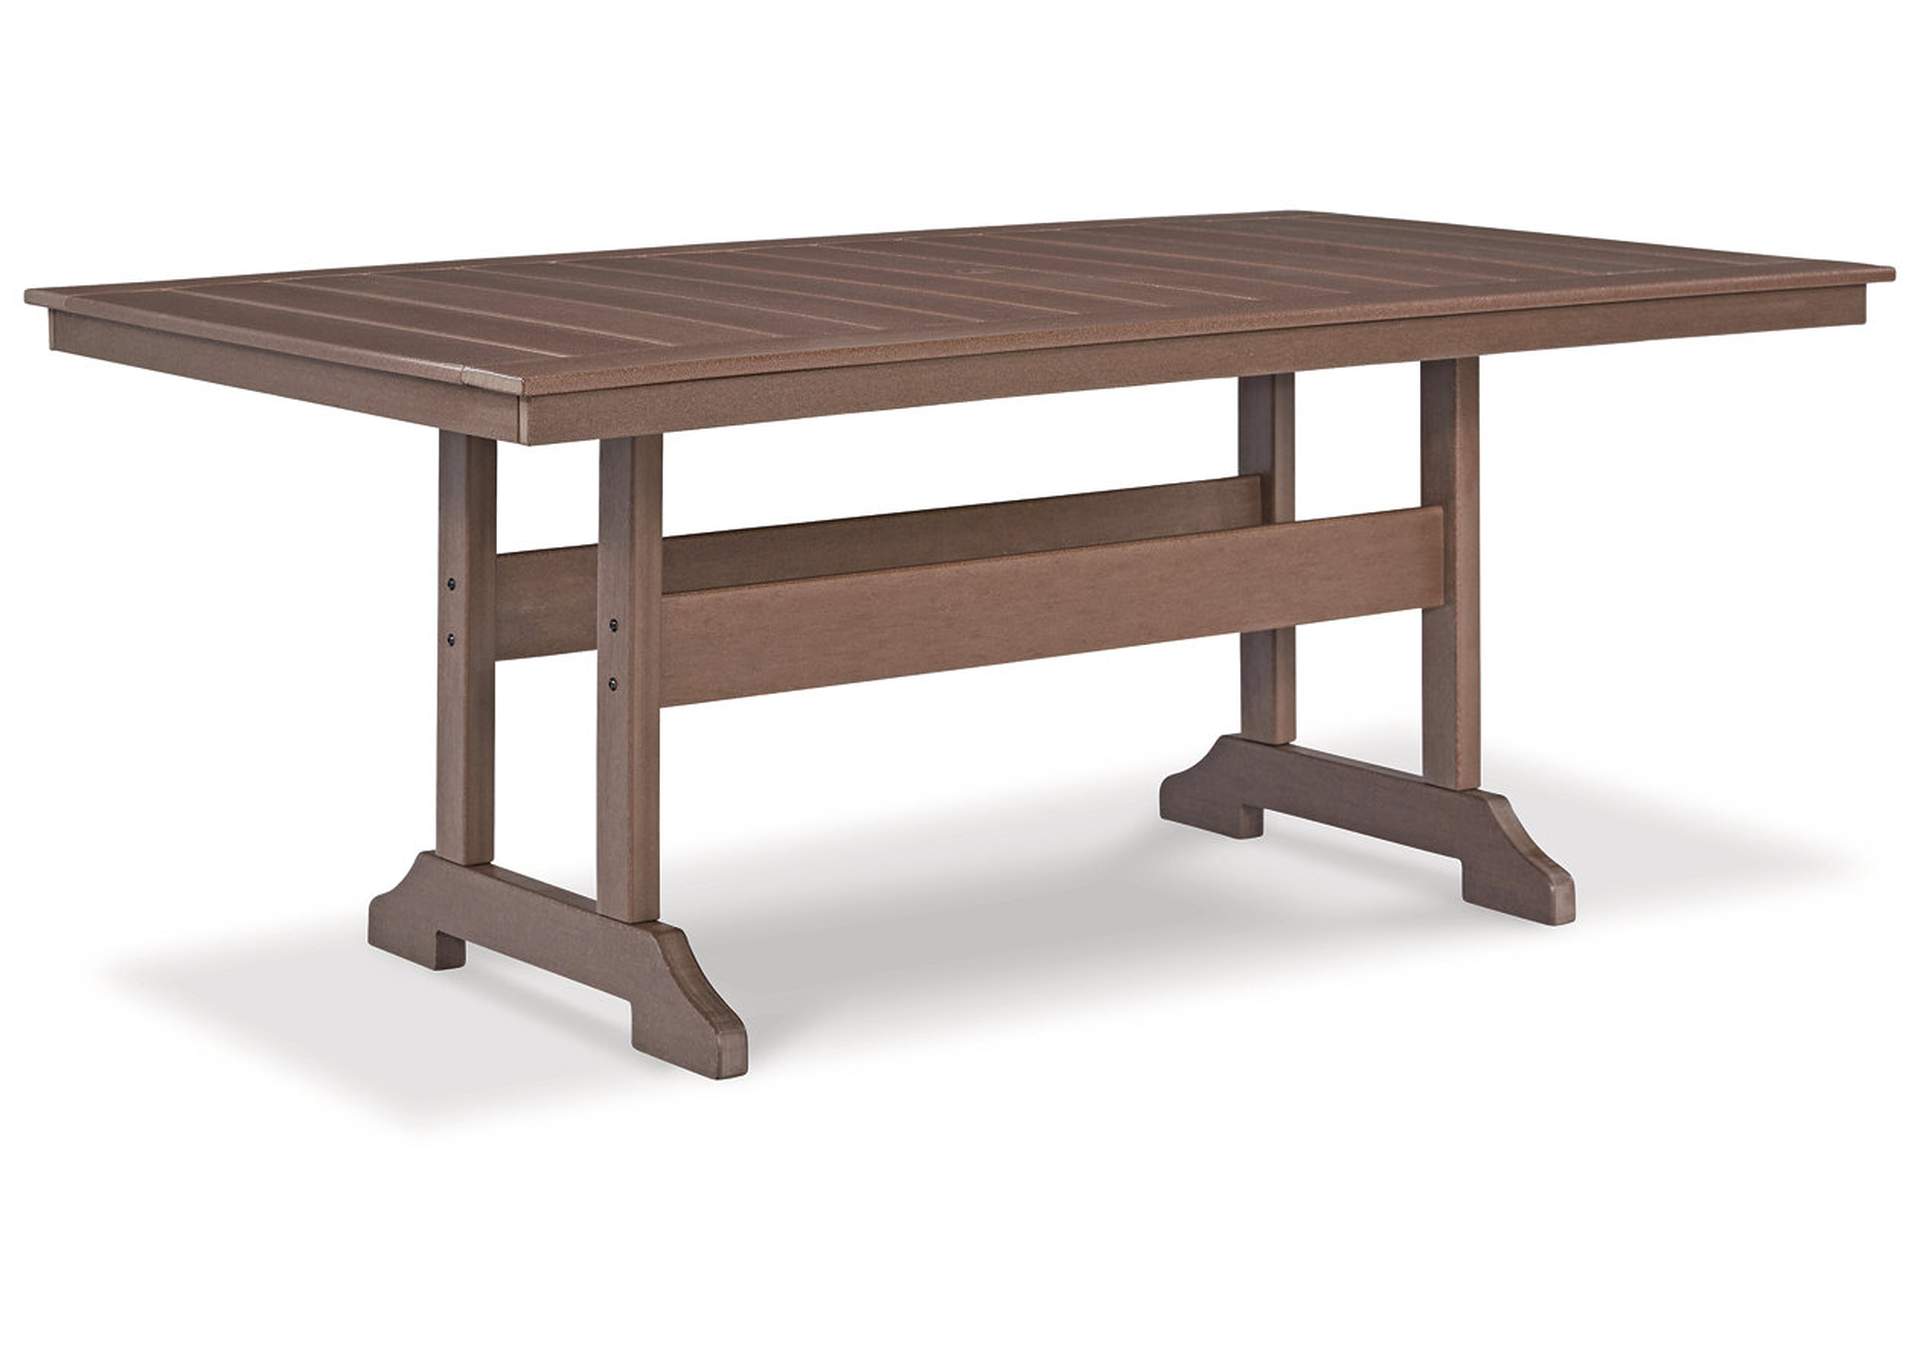 Emmeline Outdoor Dining Table,Outdoor By Ashley